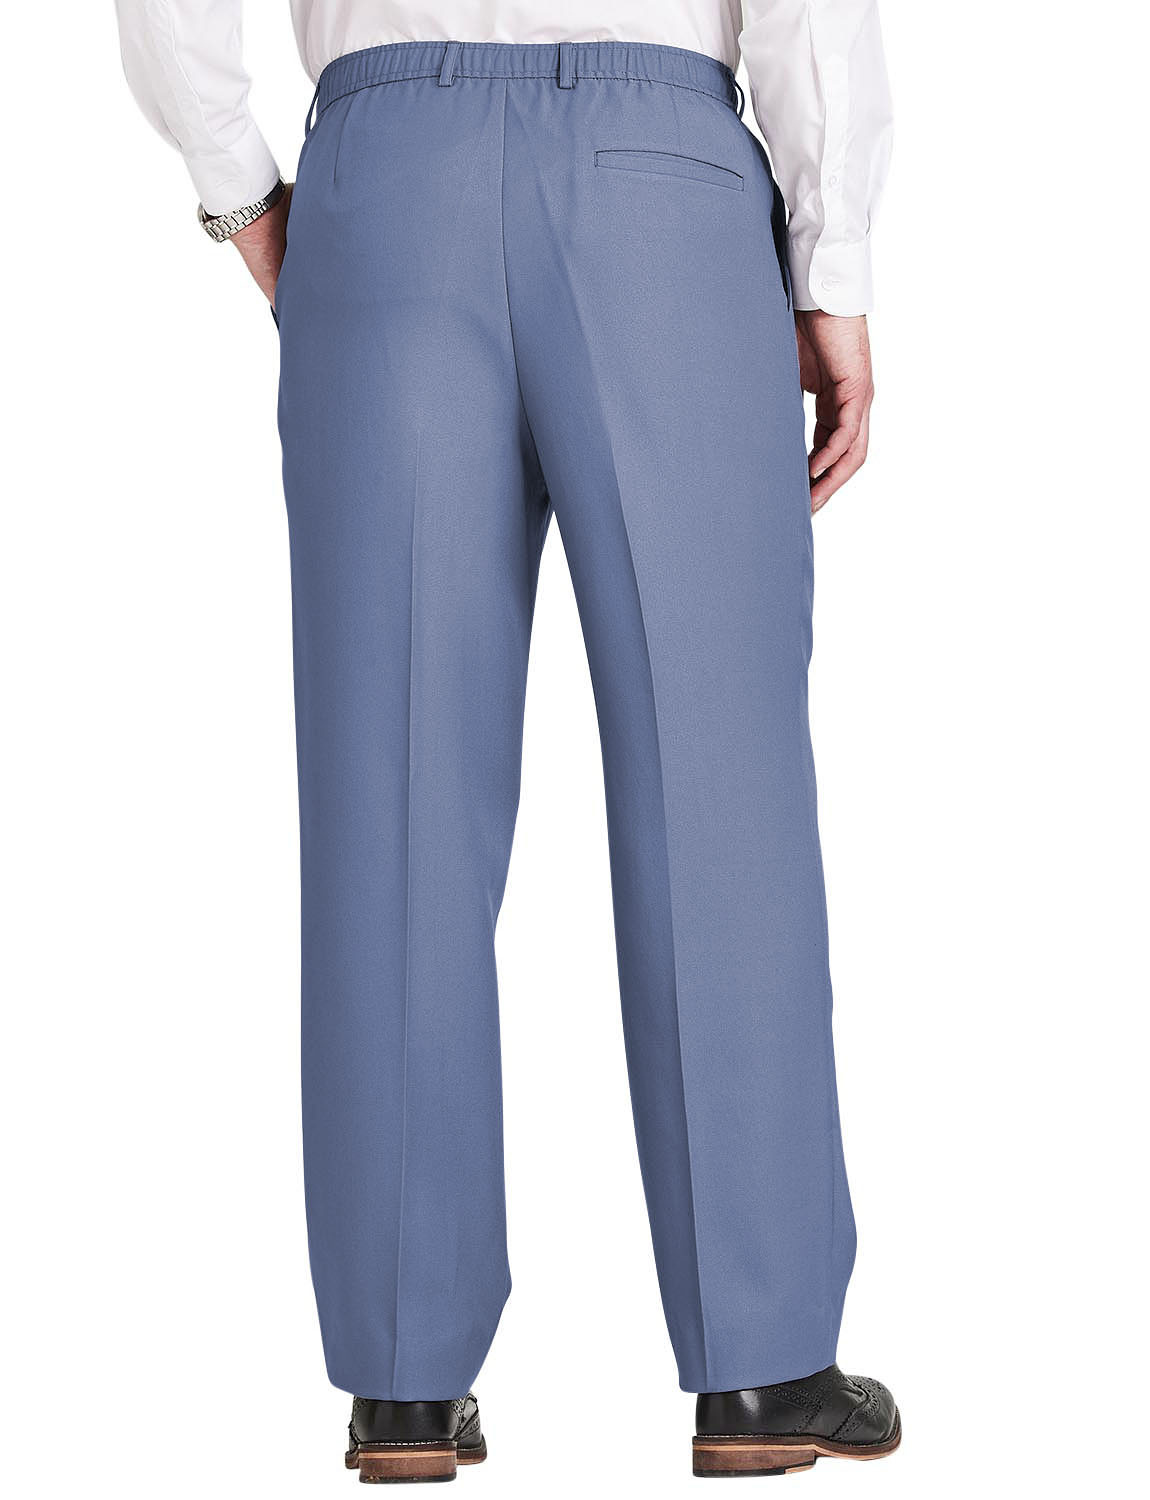 Chums pack of 2 elasticated waist pull-on trousers, convenient and  comfortable